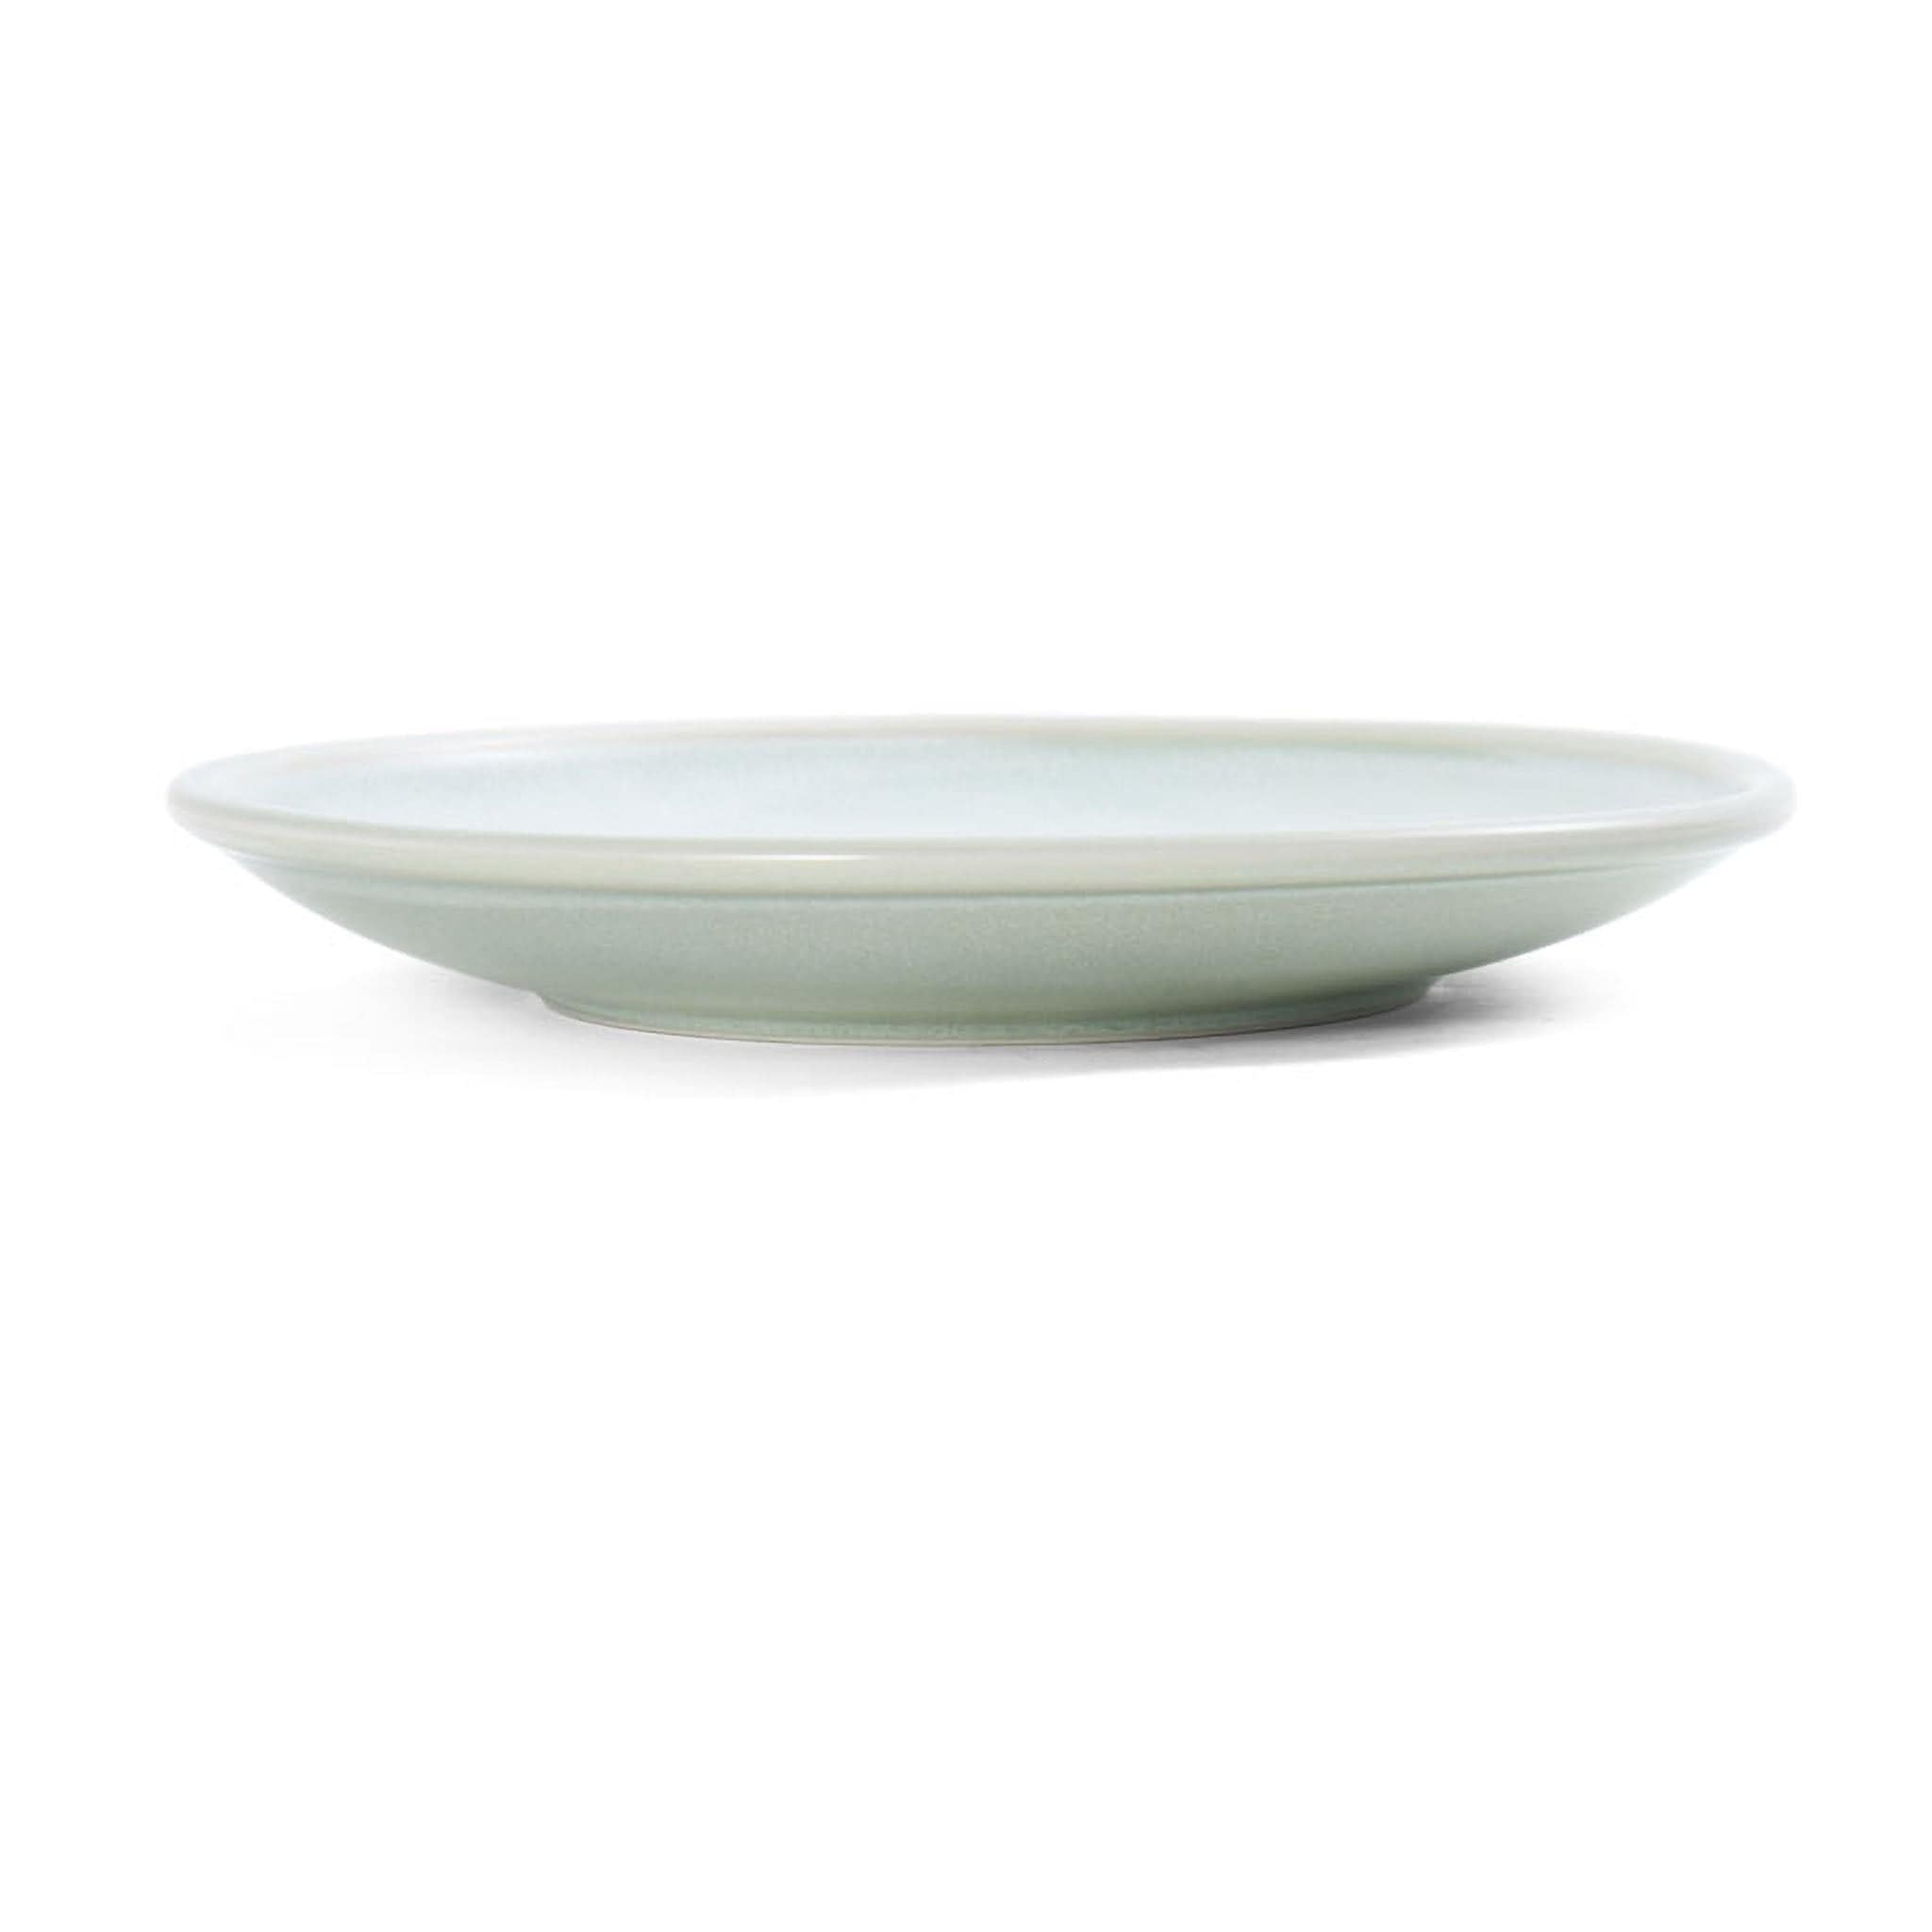 Jade Porcelain Coupe Plate 8" Green